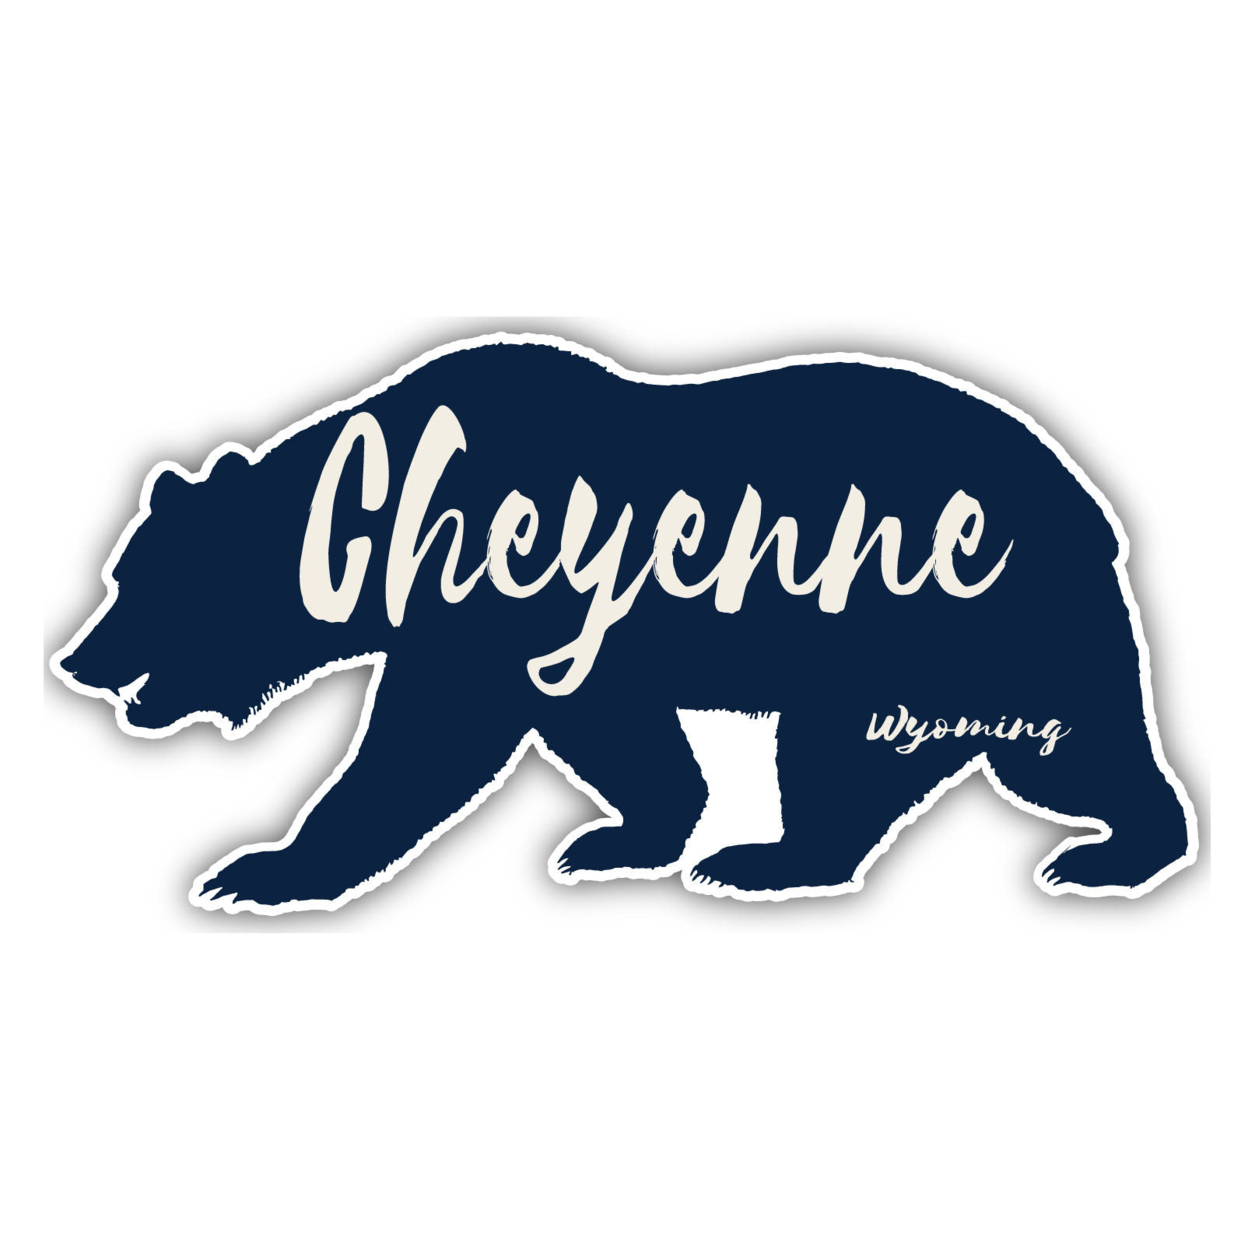 Cheyenne Wyoming Souvenir Decorative Stickers (Choose Theme And Size) - 4-Pack, 12-Inch, Tent